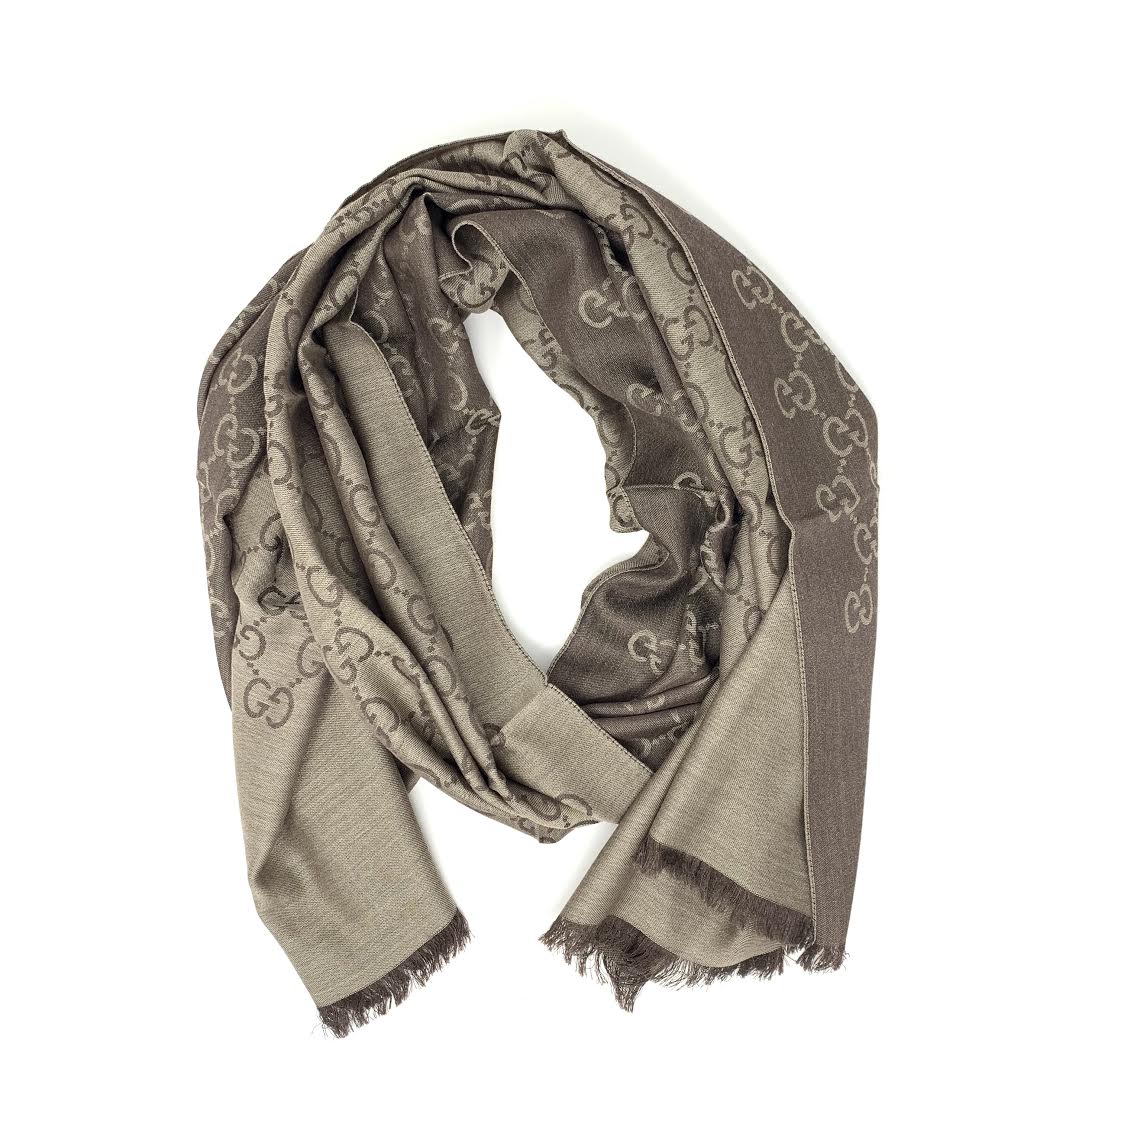 Gucci Gg Large Wool Silk-Blend Scarf ShopStyle Scarves, 42% OFF